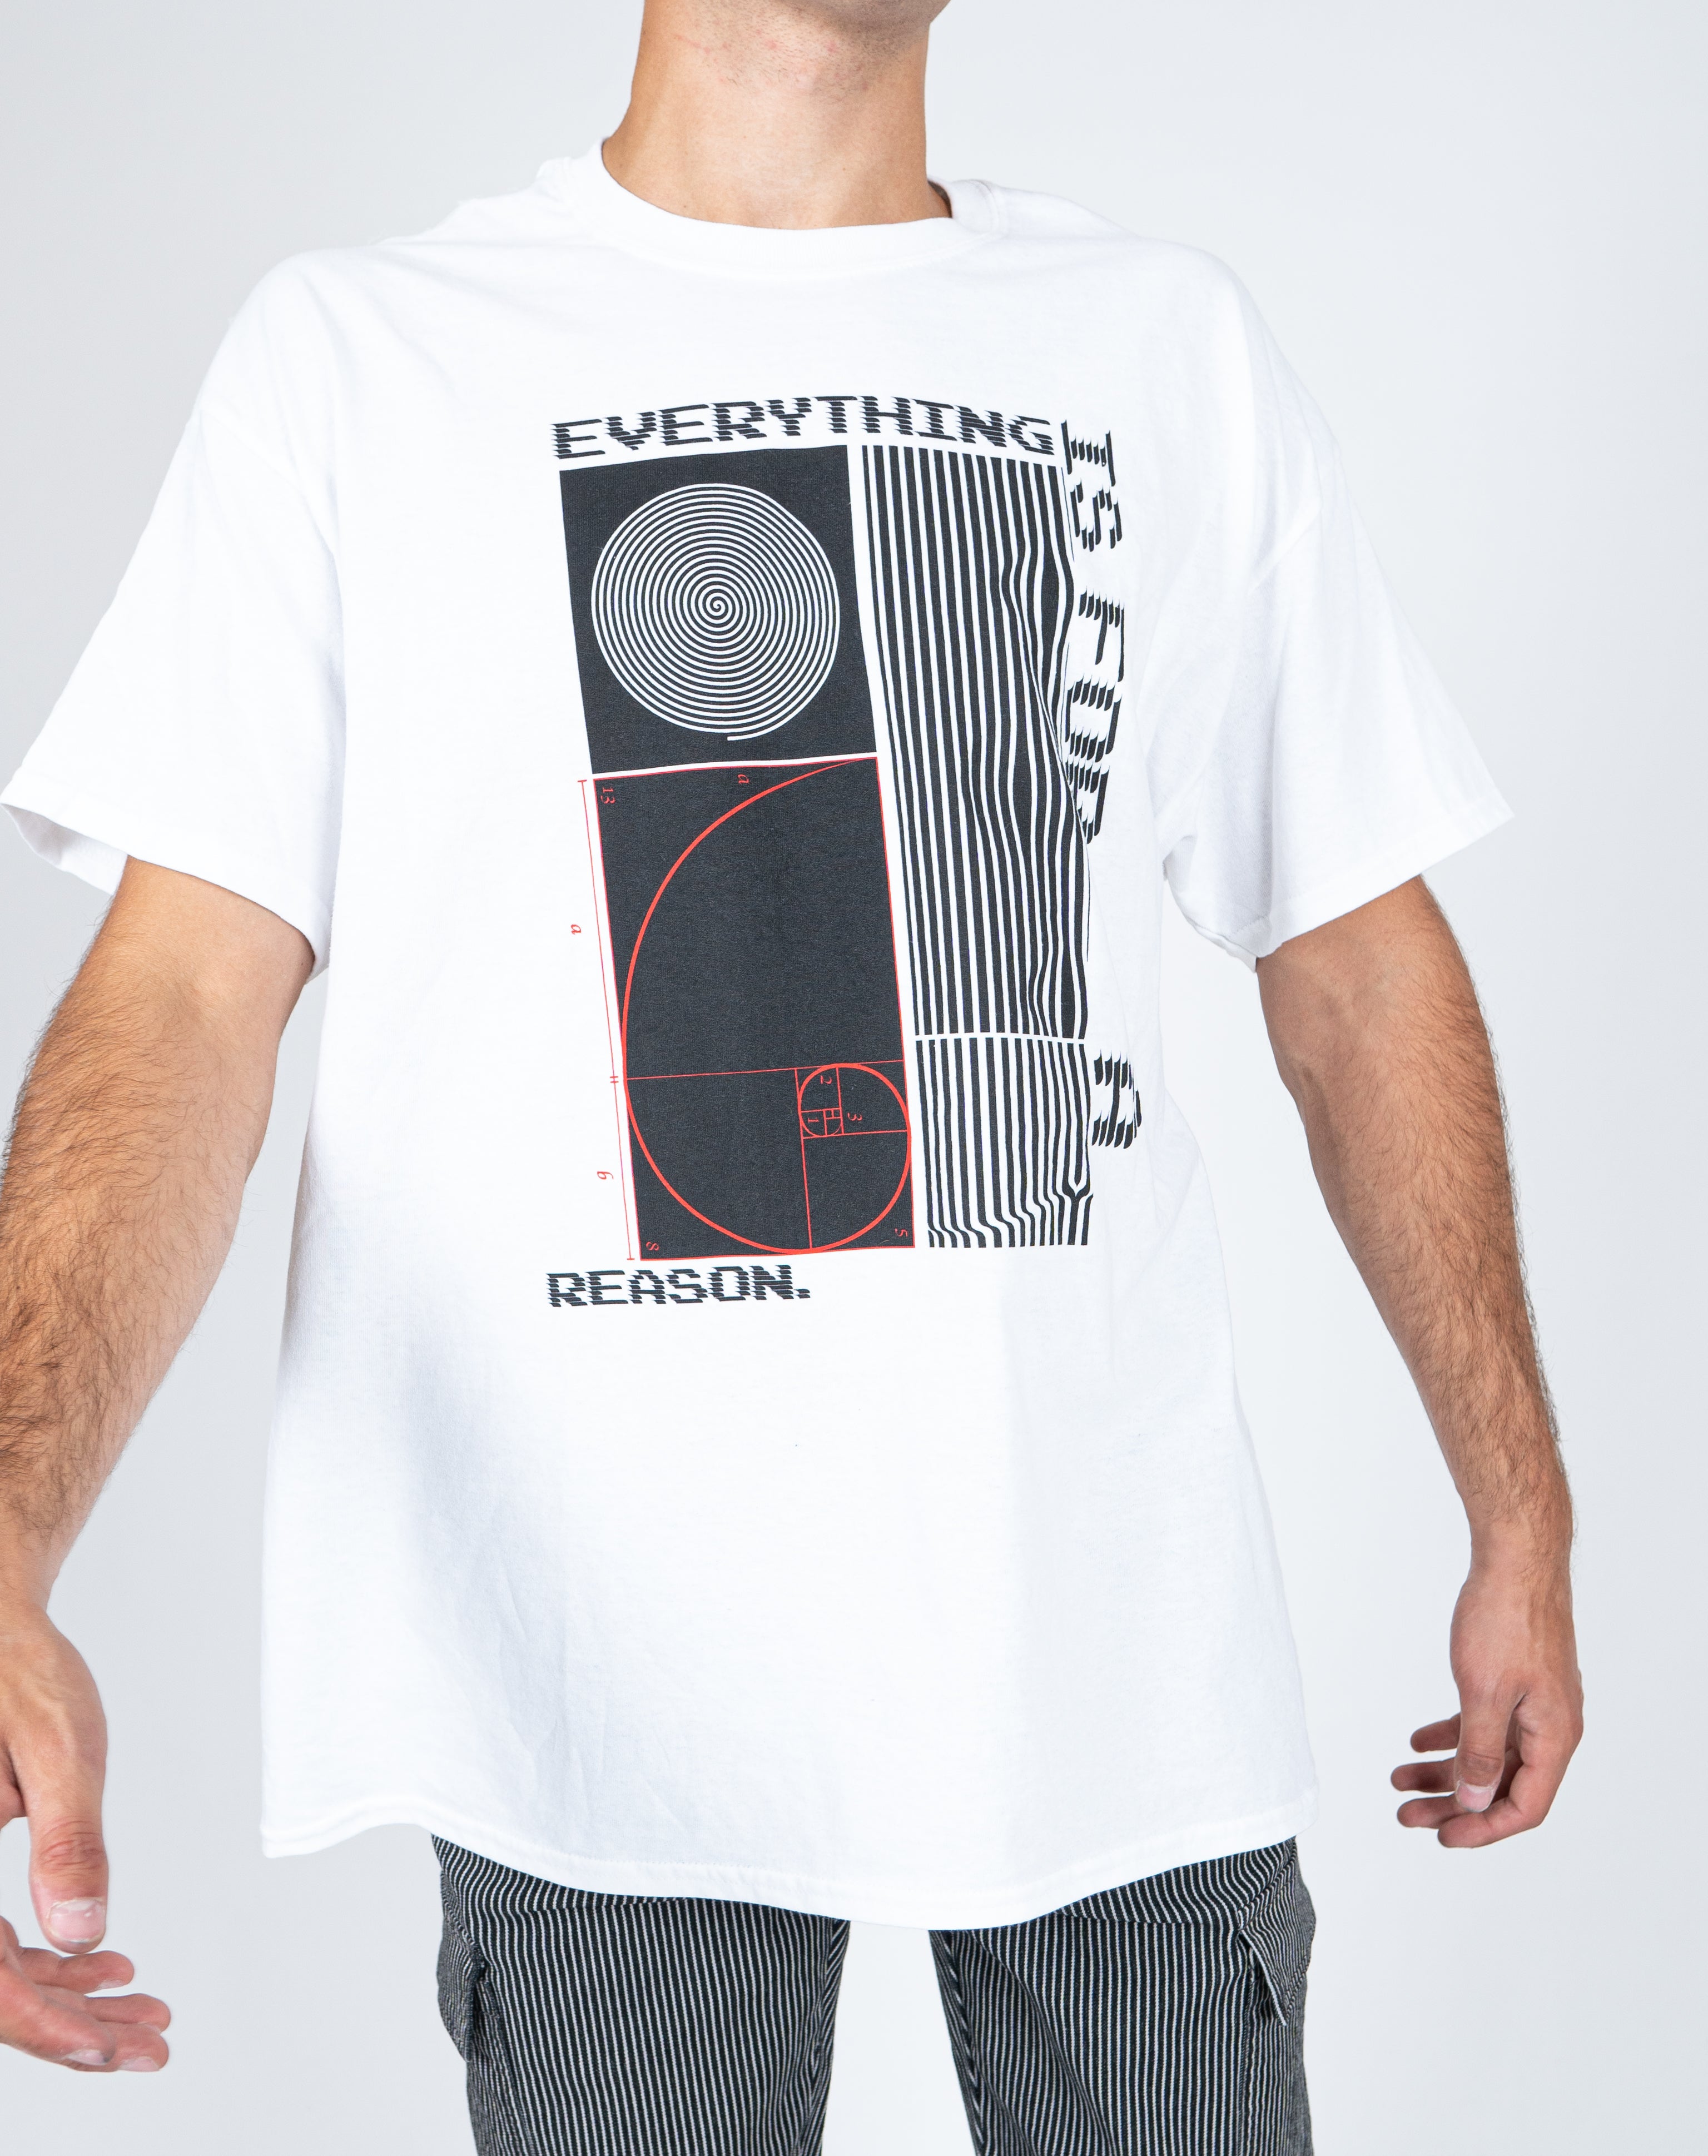 'EVERYTHING HAPPENS FOR A REASON' Printed White T-Shirt